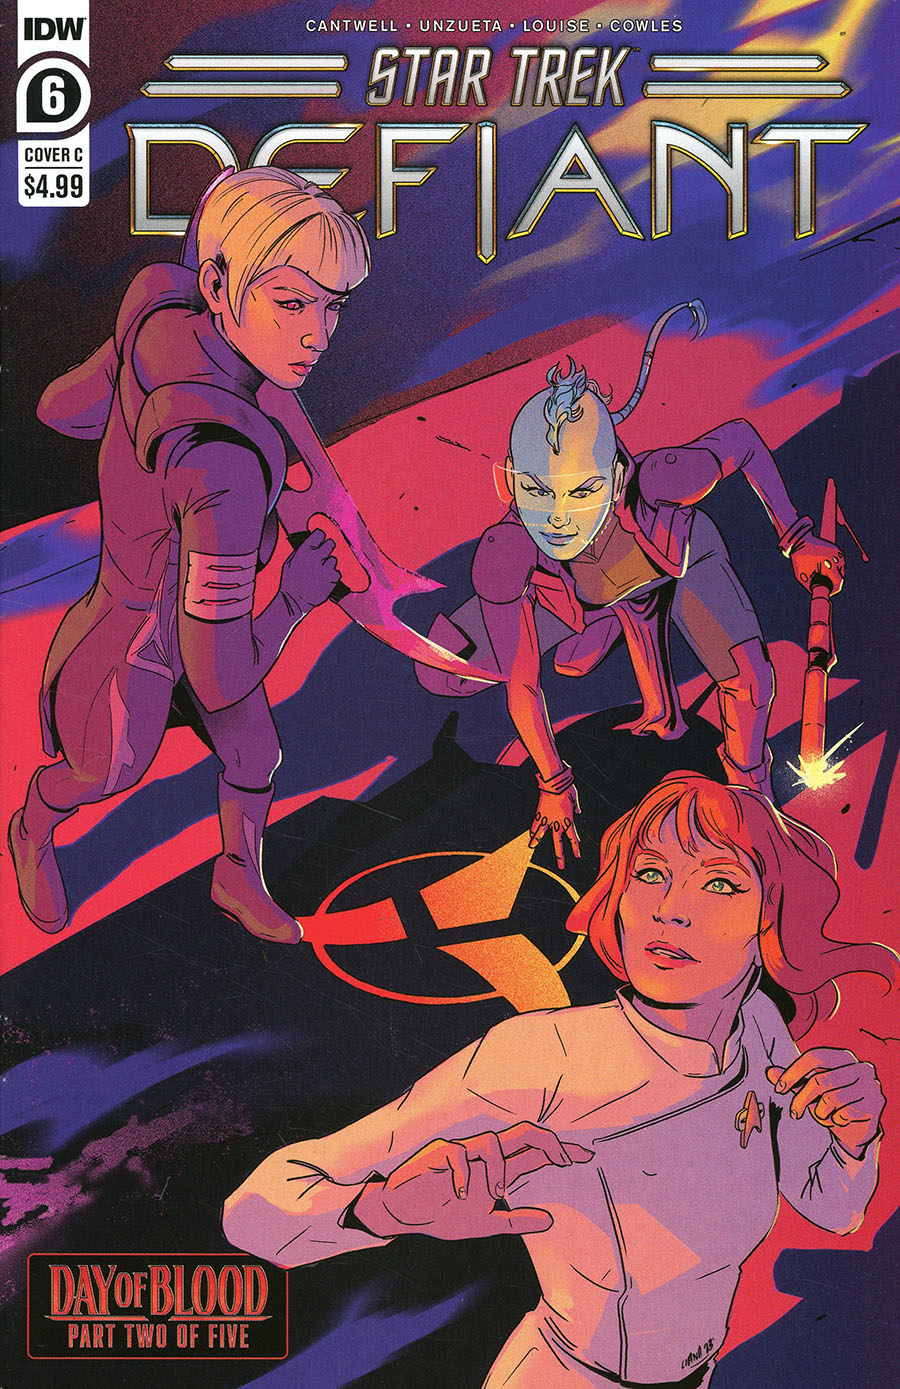 Star Trek Defiant #6 Cover C Variant Liana Kangas Cover (Day Of Blood Part 2)